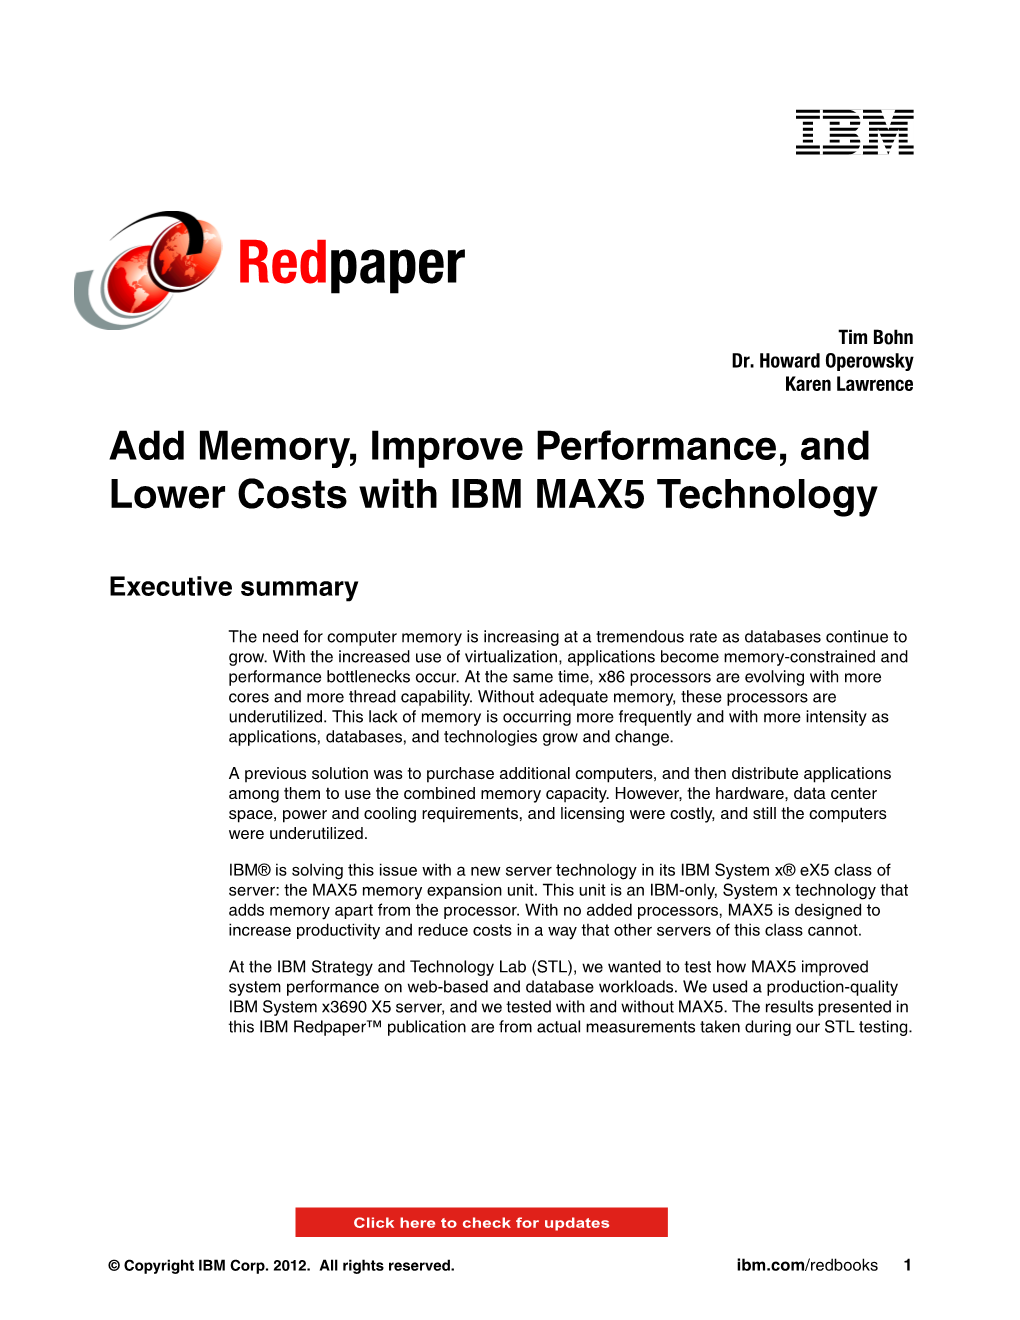 Add Memory, Improve Performance, and Lower Costs with IBM MAX5 Technology